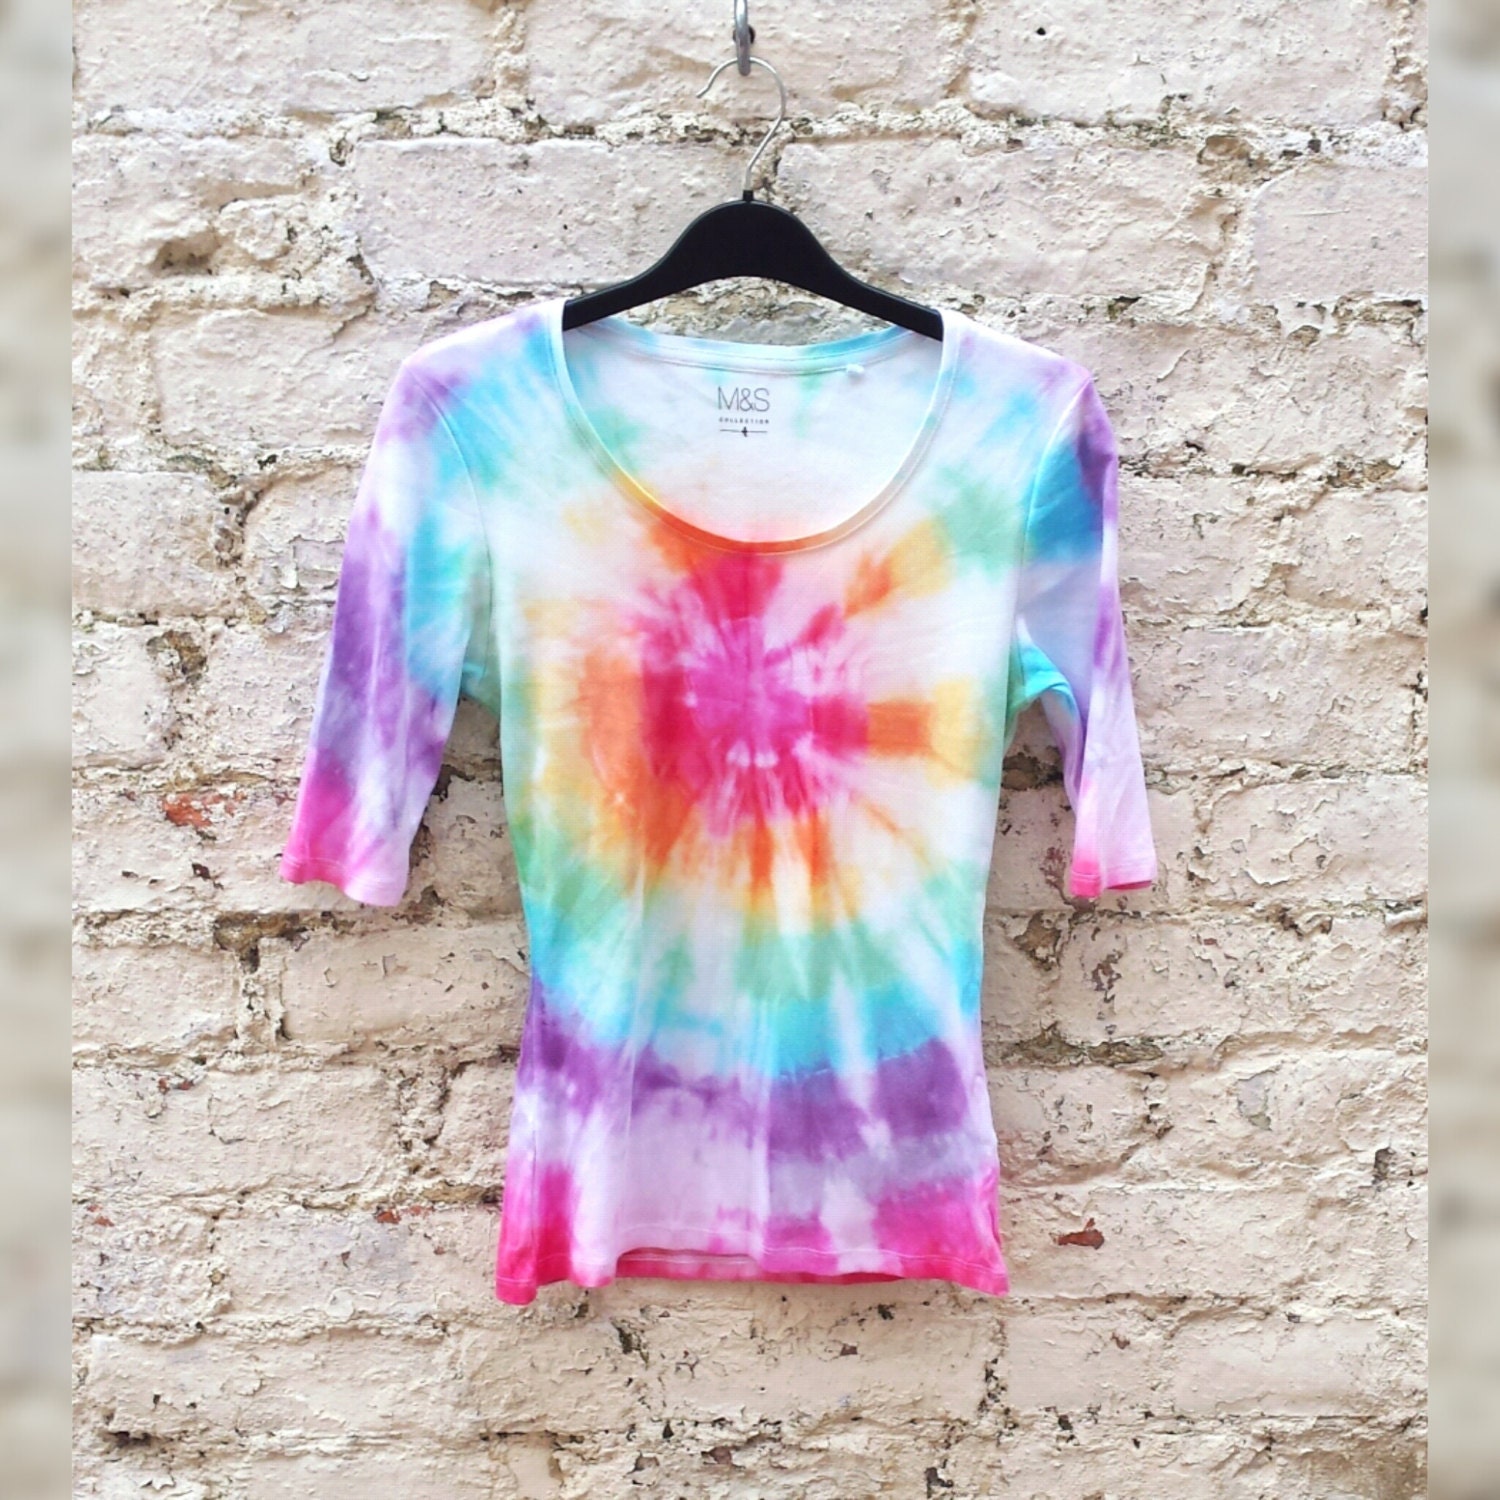 Pastel Rainbow Tie Dye T-shirt to fit UK size 8 or US size 4